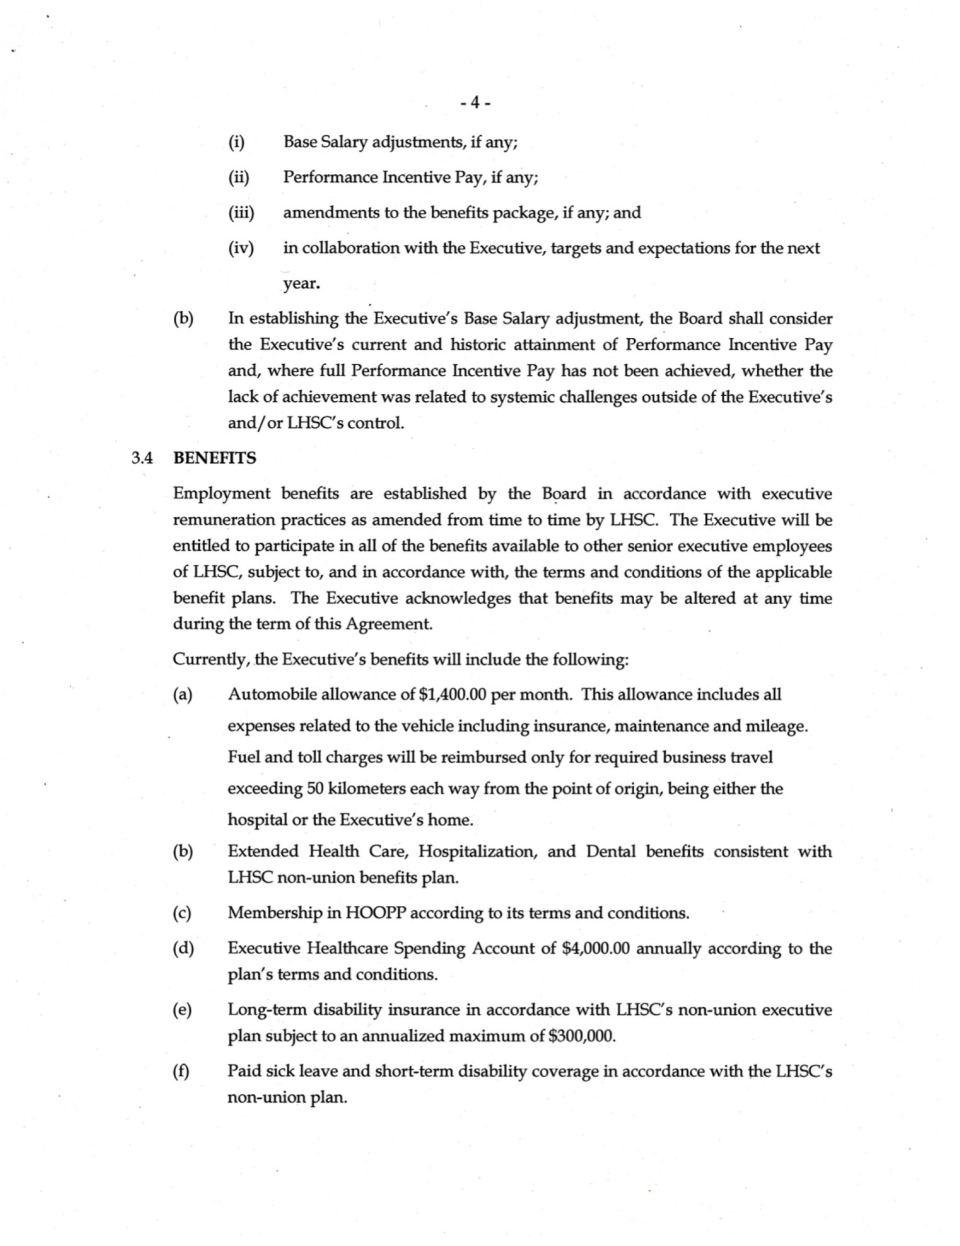 Dr. Paul Woods Contract Page 5